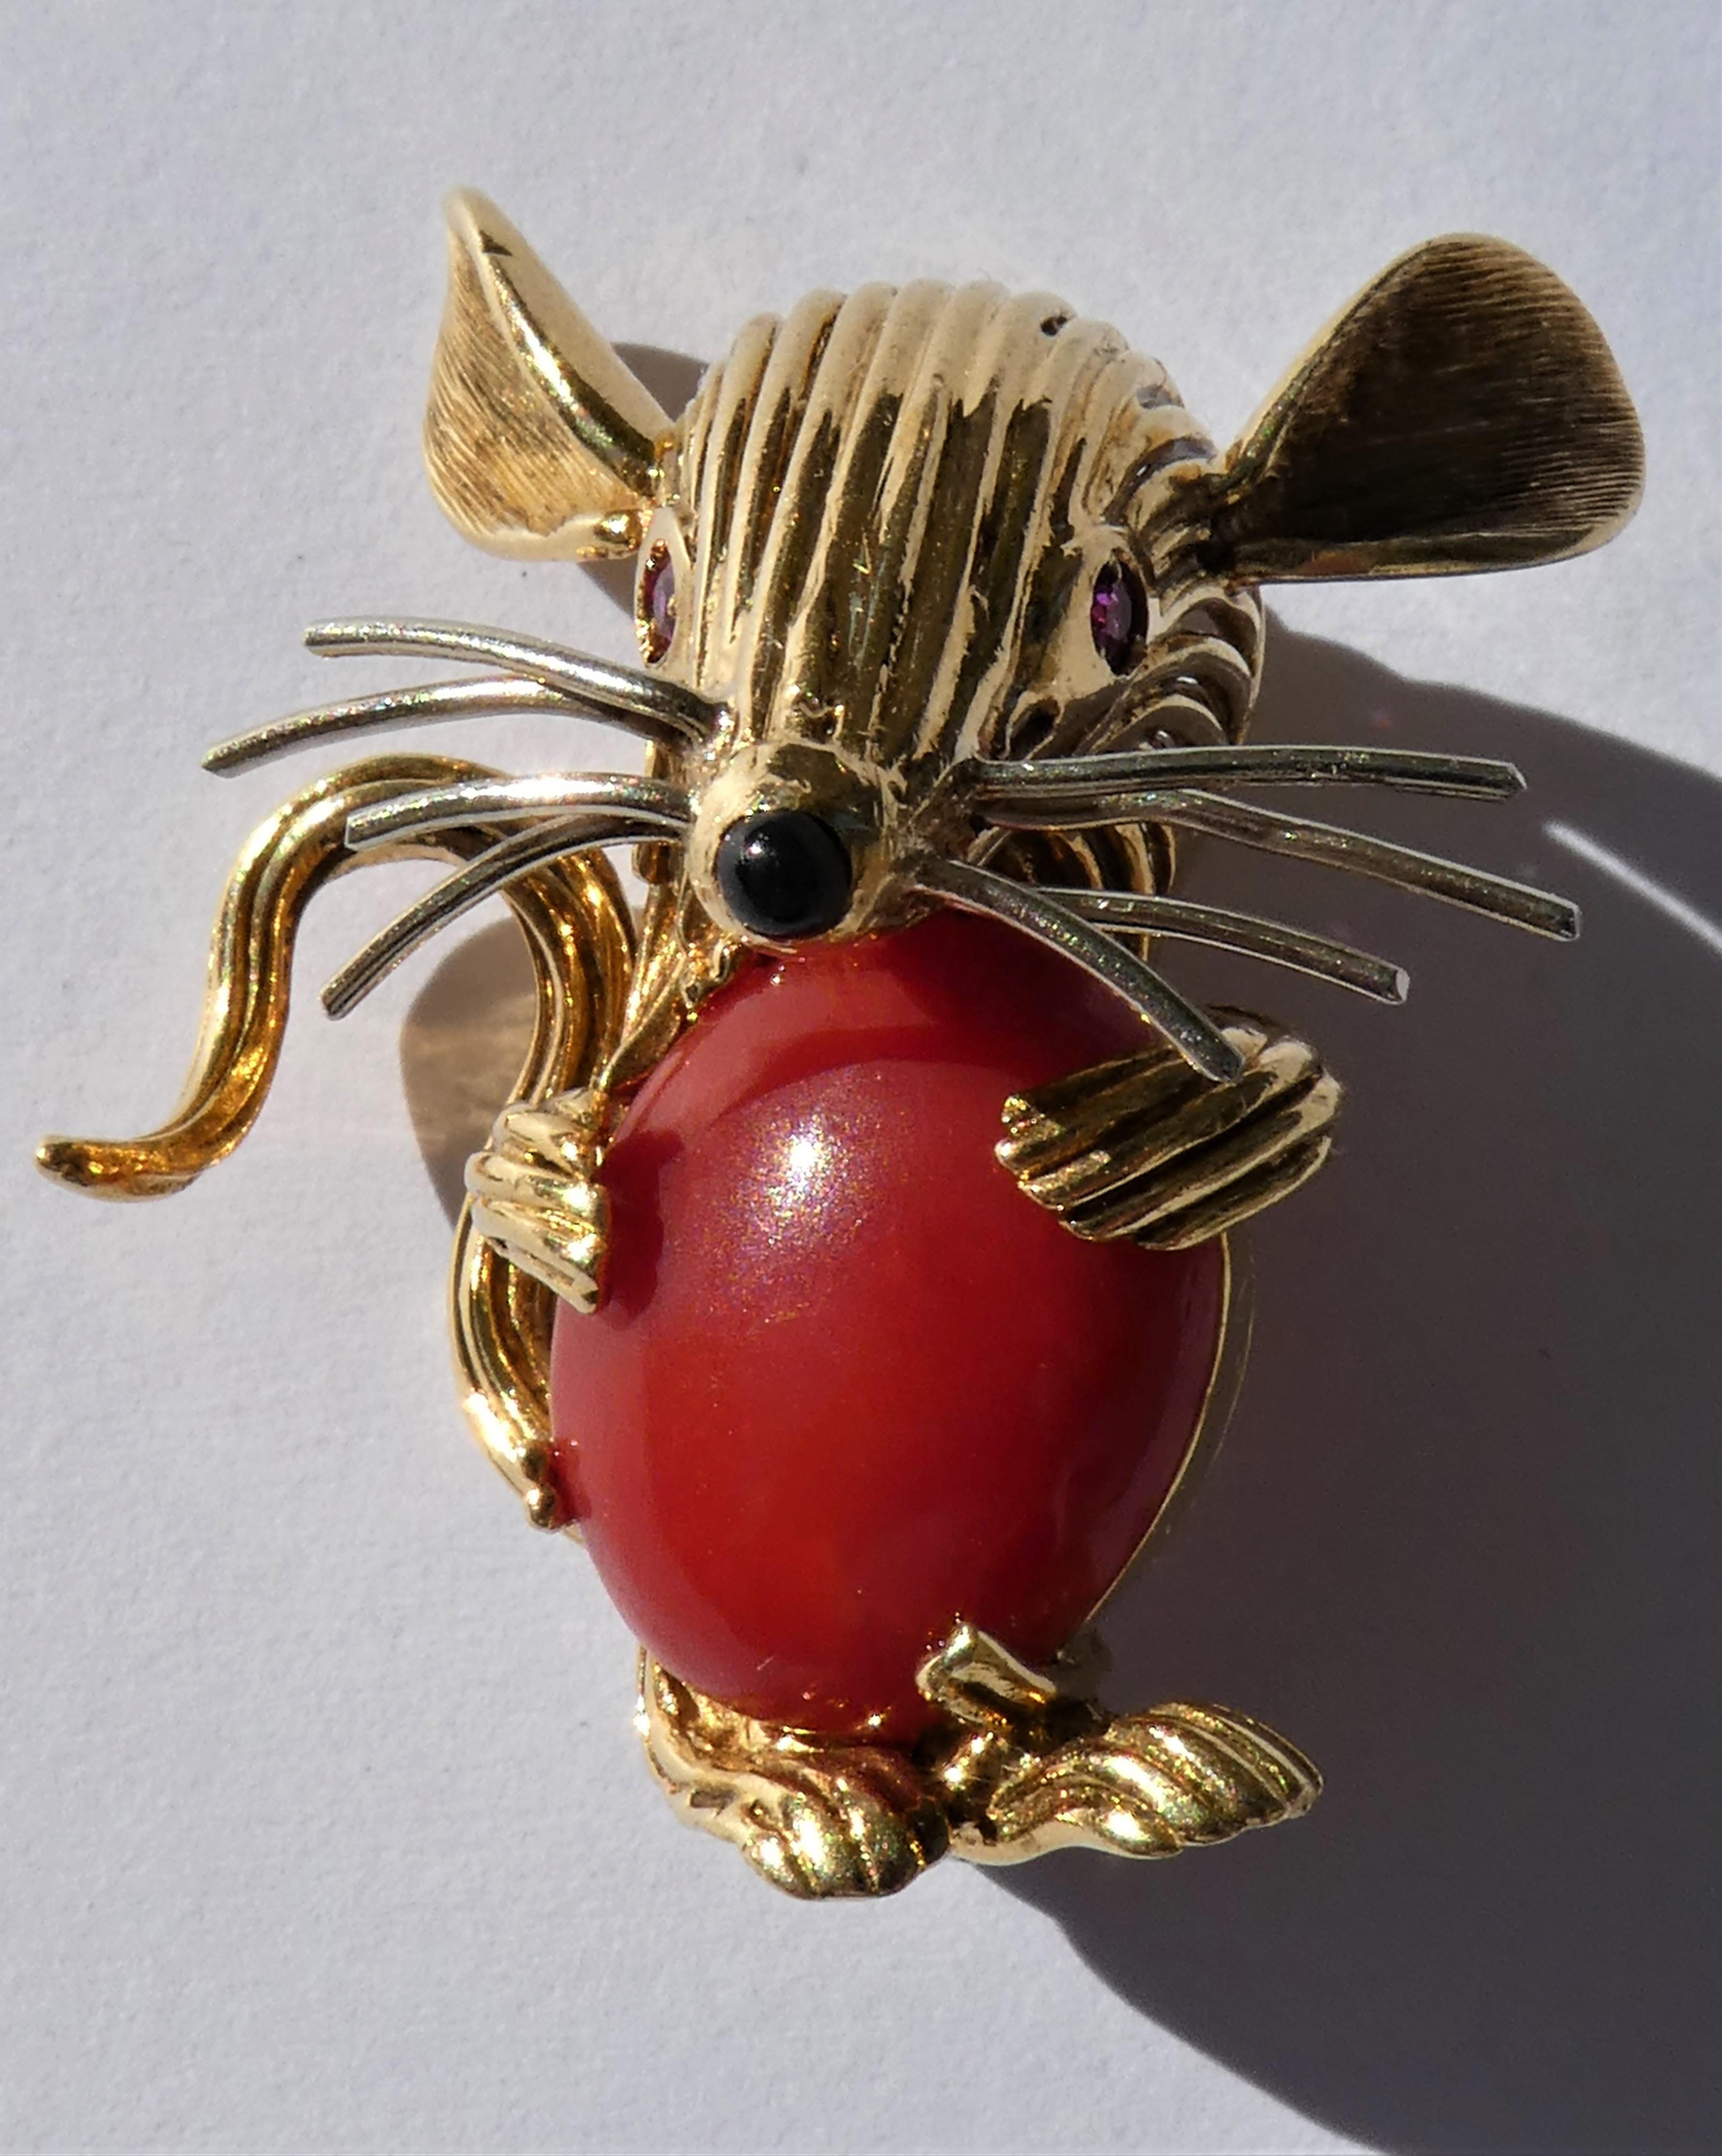 This lovely mouse brooch was crafted in Italy in the 1950s in 18 karat yellow gold. It has wonderful details like a chubby belly made out of a dark red Mediterranean coral cabochon and a black onyx nose. The mouse has 2 round cut vibrant red ruby